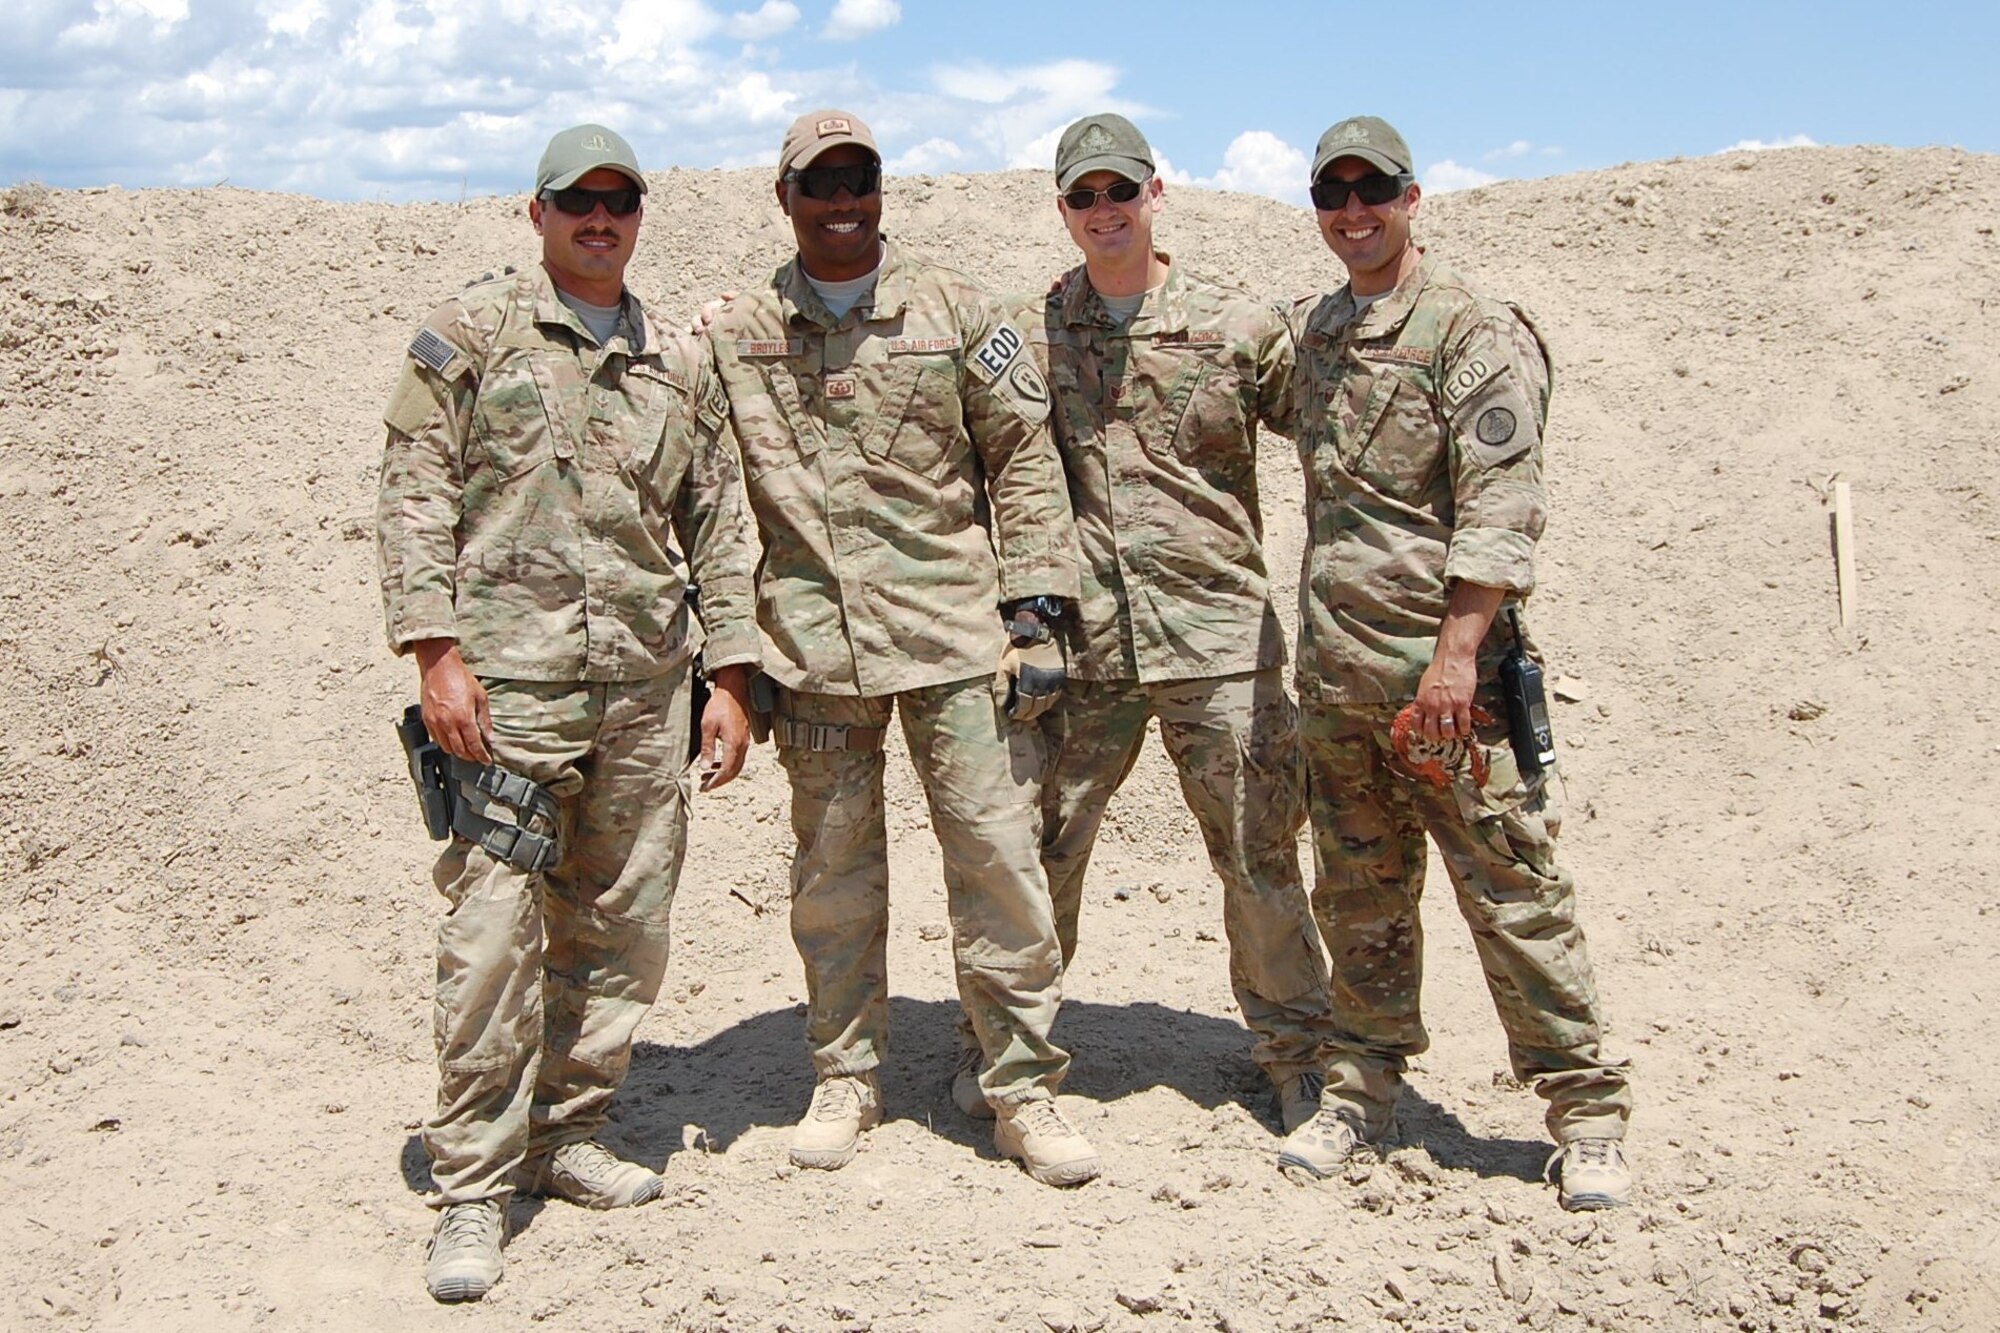 The 140th Wing’s 140th Explosive Ordnance Disposal Flight members from left to right: Airman 1st Class Darrell Linkus, Staff Sgt. Christopher Broyles, Tech. Sgt. Andrew LeBeau, and Master Sgt. Richard Gibbons. (U.S. Air National Guard photo by Capt. Kinder Blacke)